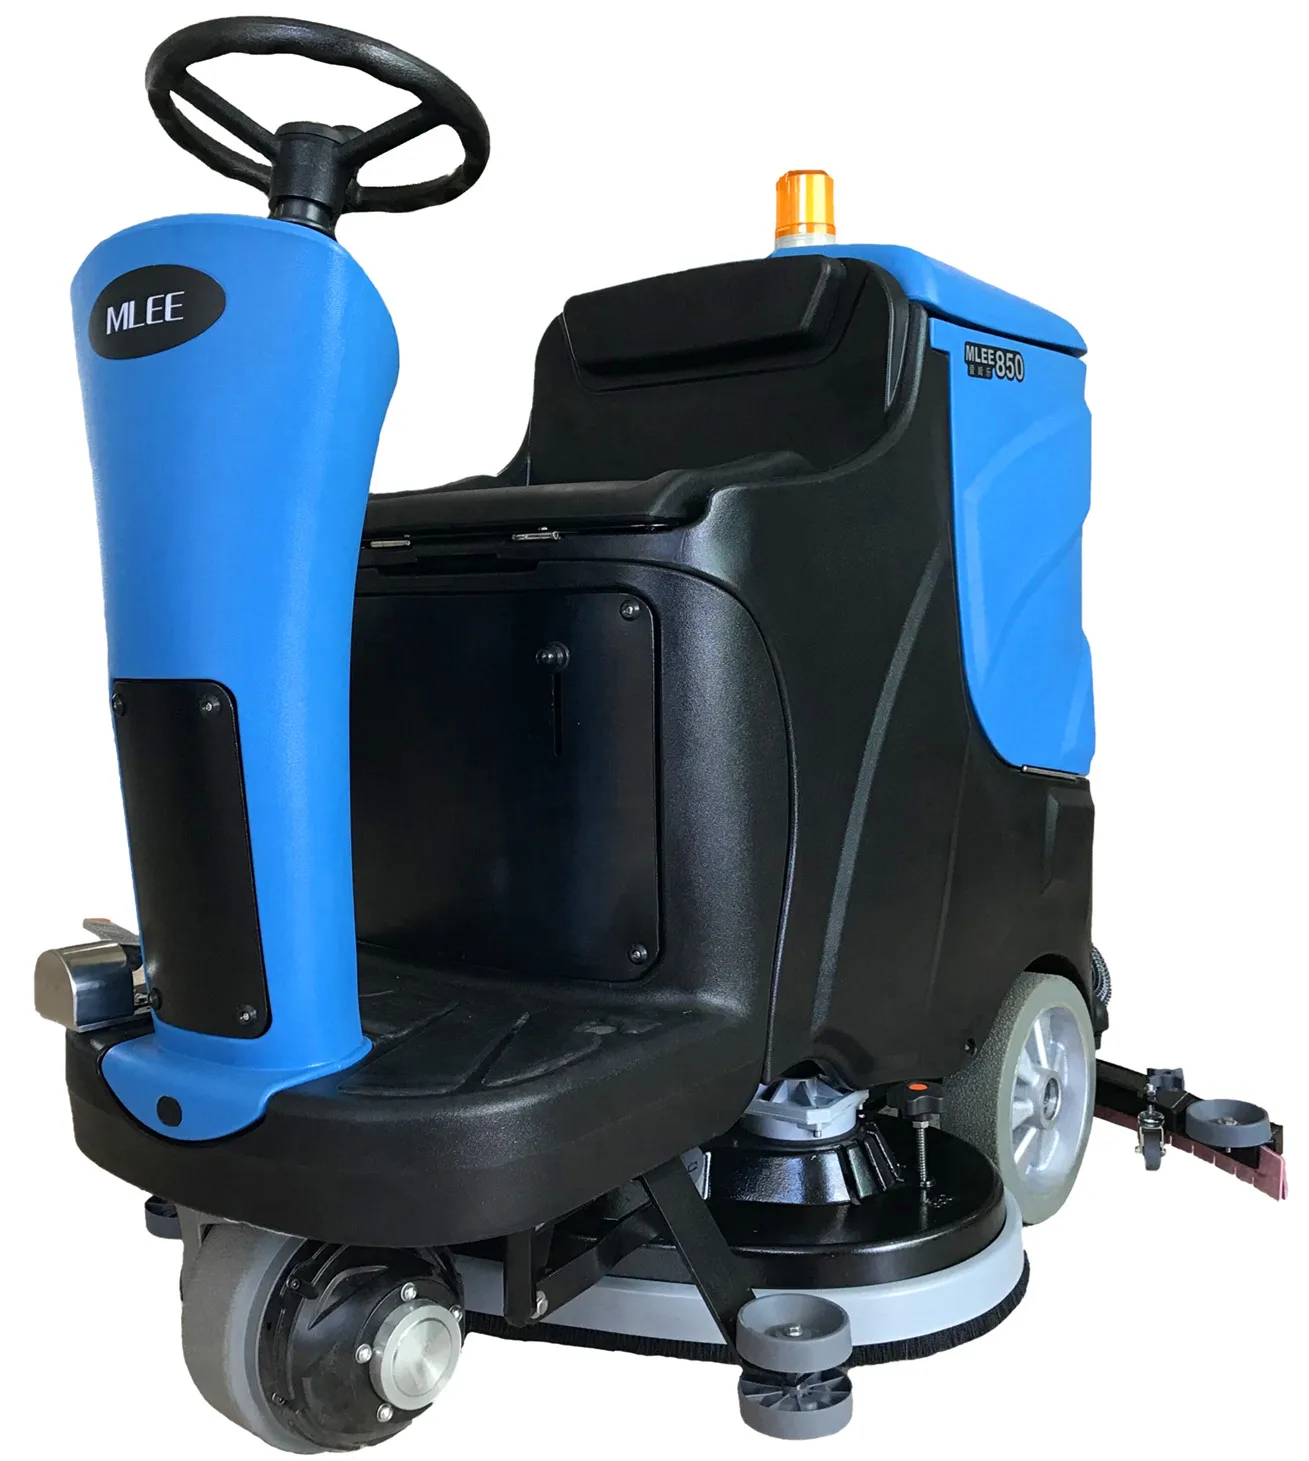 Mlee 850bt Wet Dry Driving Automatic Floor Cleaning Machine